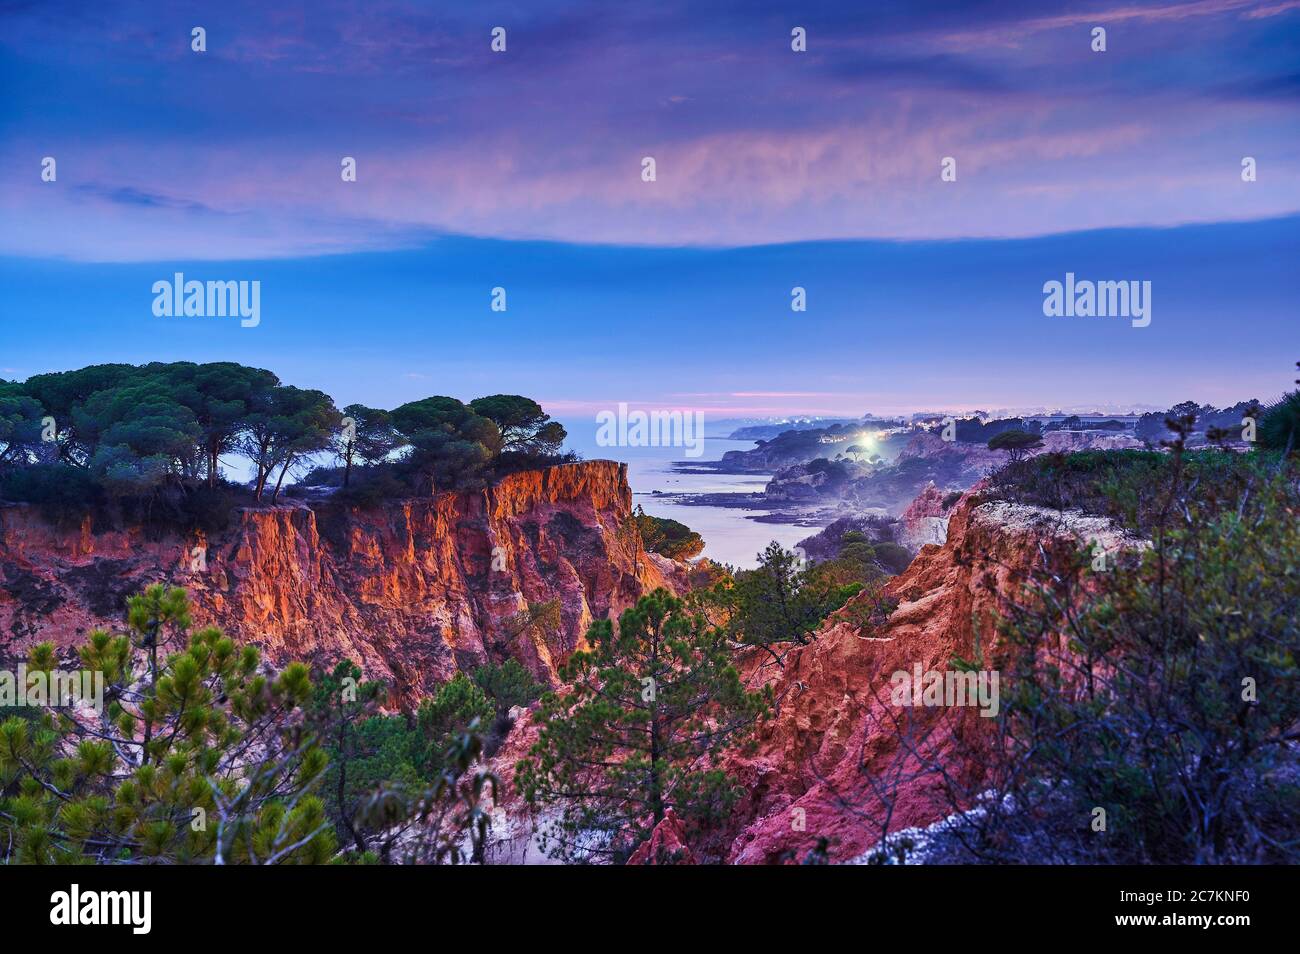 Europe, Portugal, Algarve, Litoral, Barlavento, Faro district, between Vilamoura and Albufeira, Olhos de Agua, sunset in a gorge on the cliffs Stock Photo